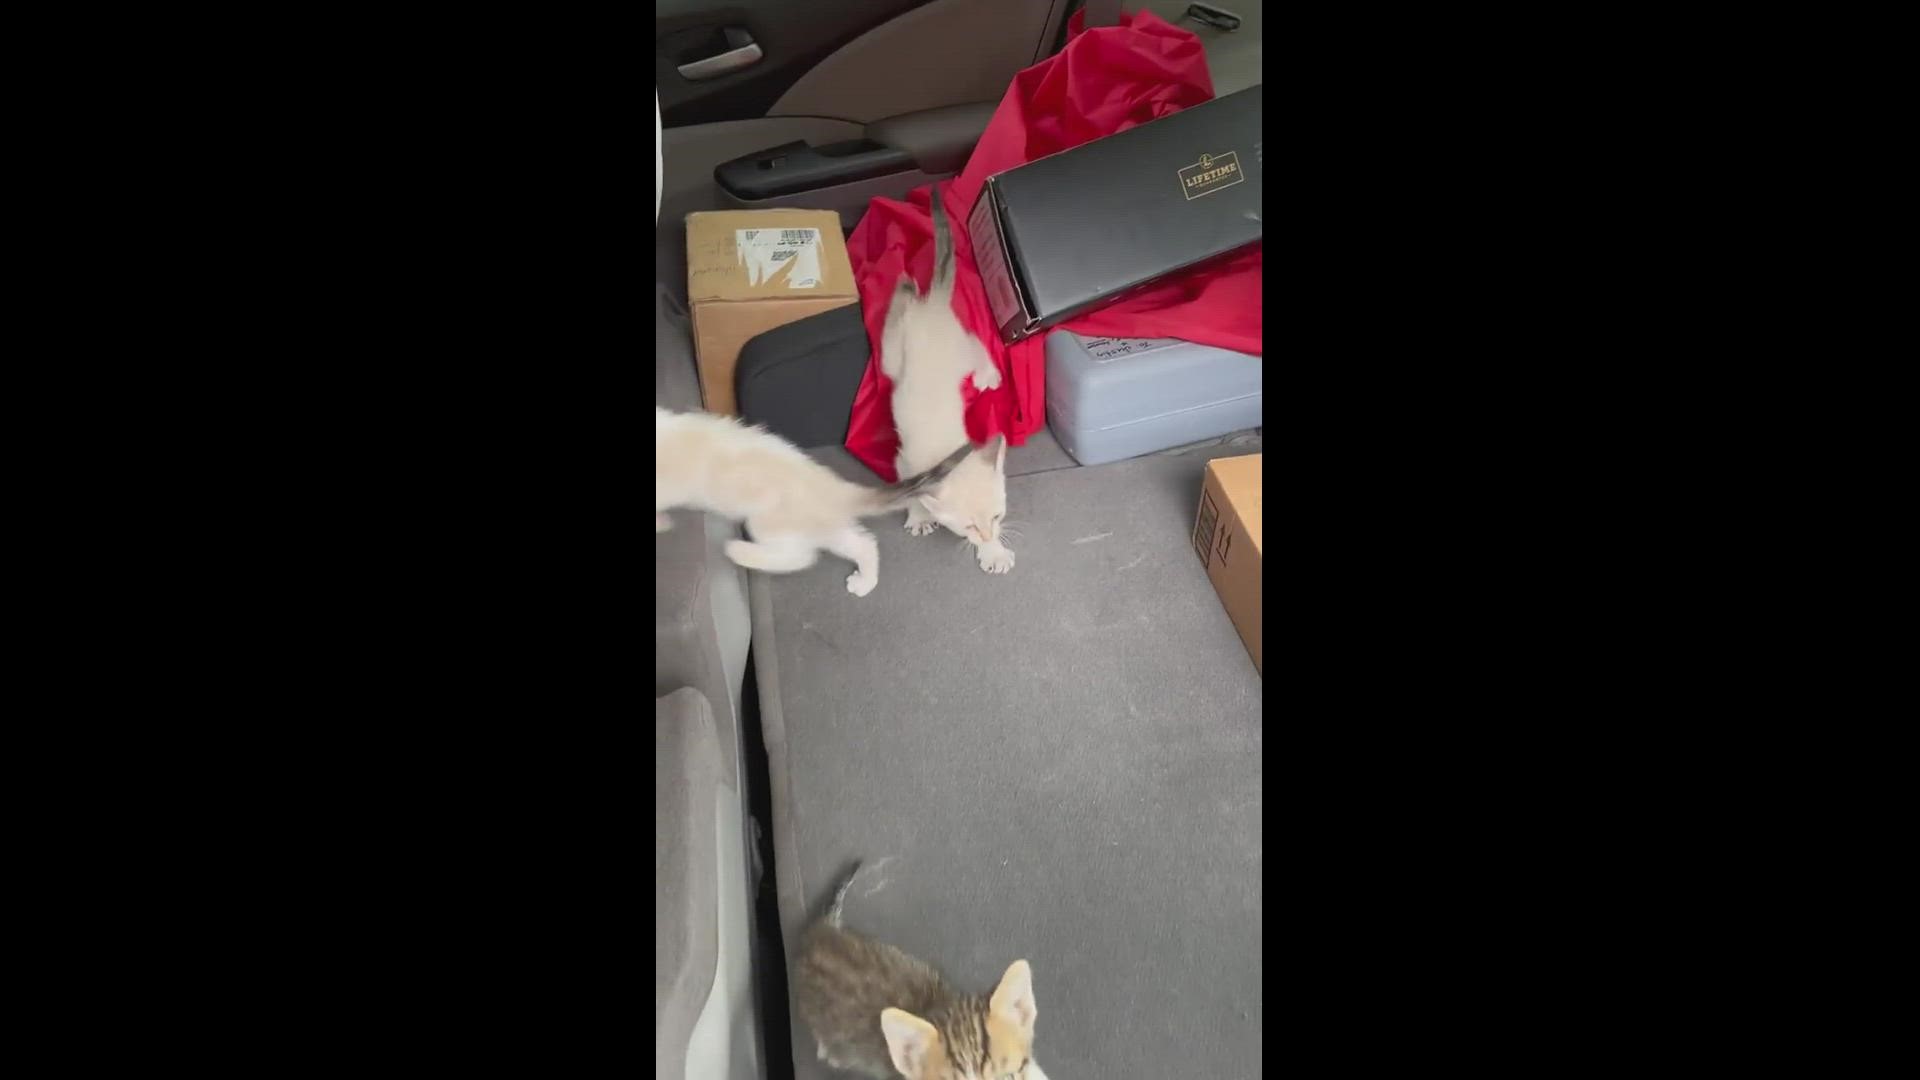 Robert Brantley knew he'd be saving all 13 kittens and began loading them up in his SUV.